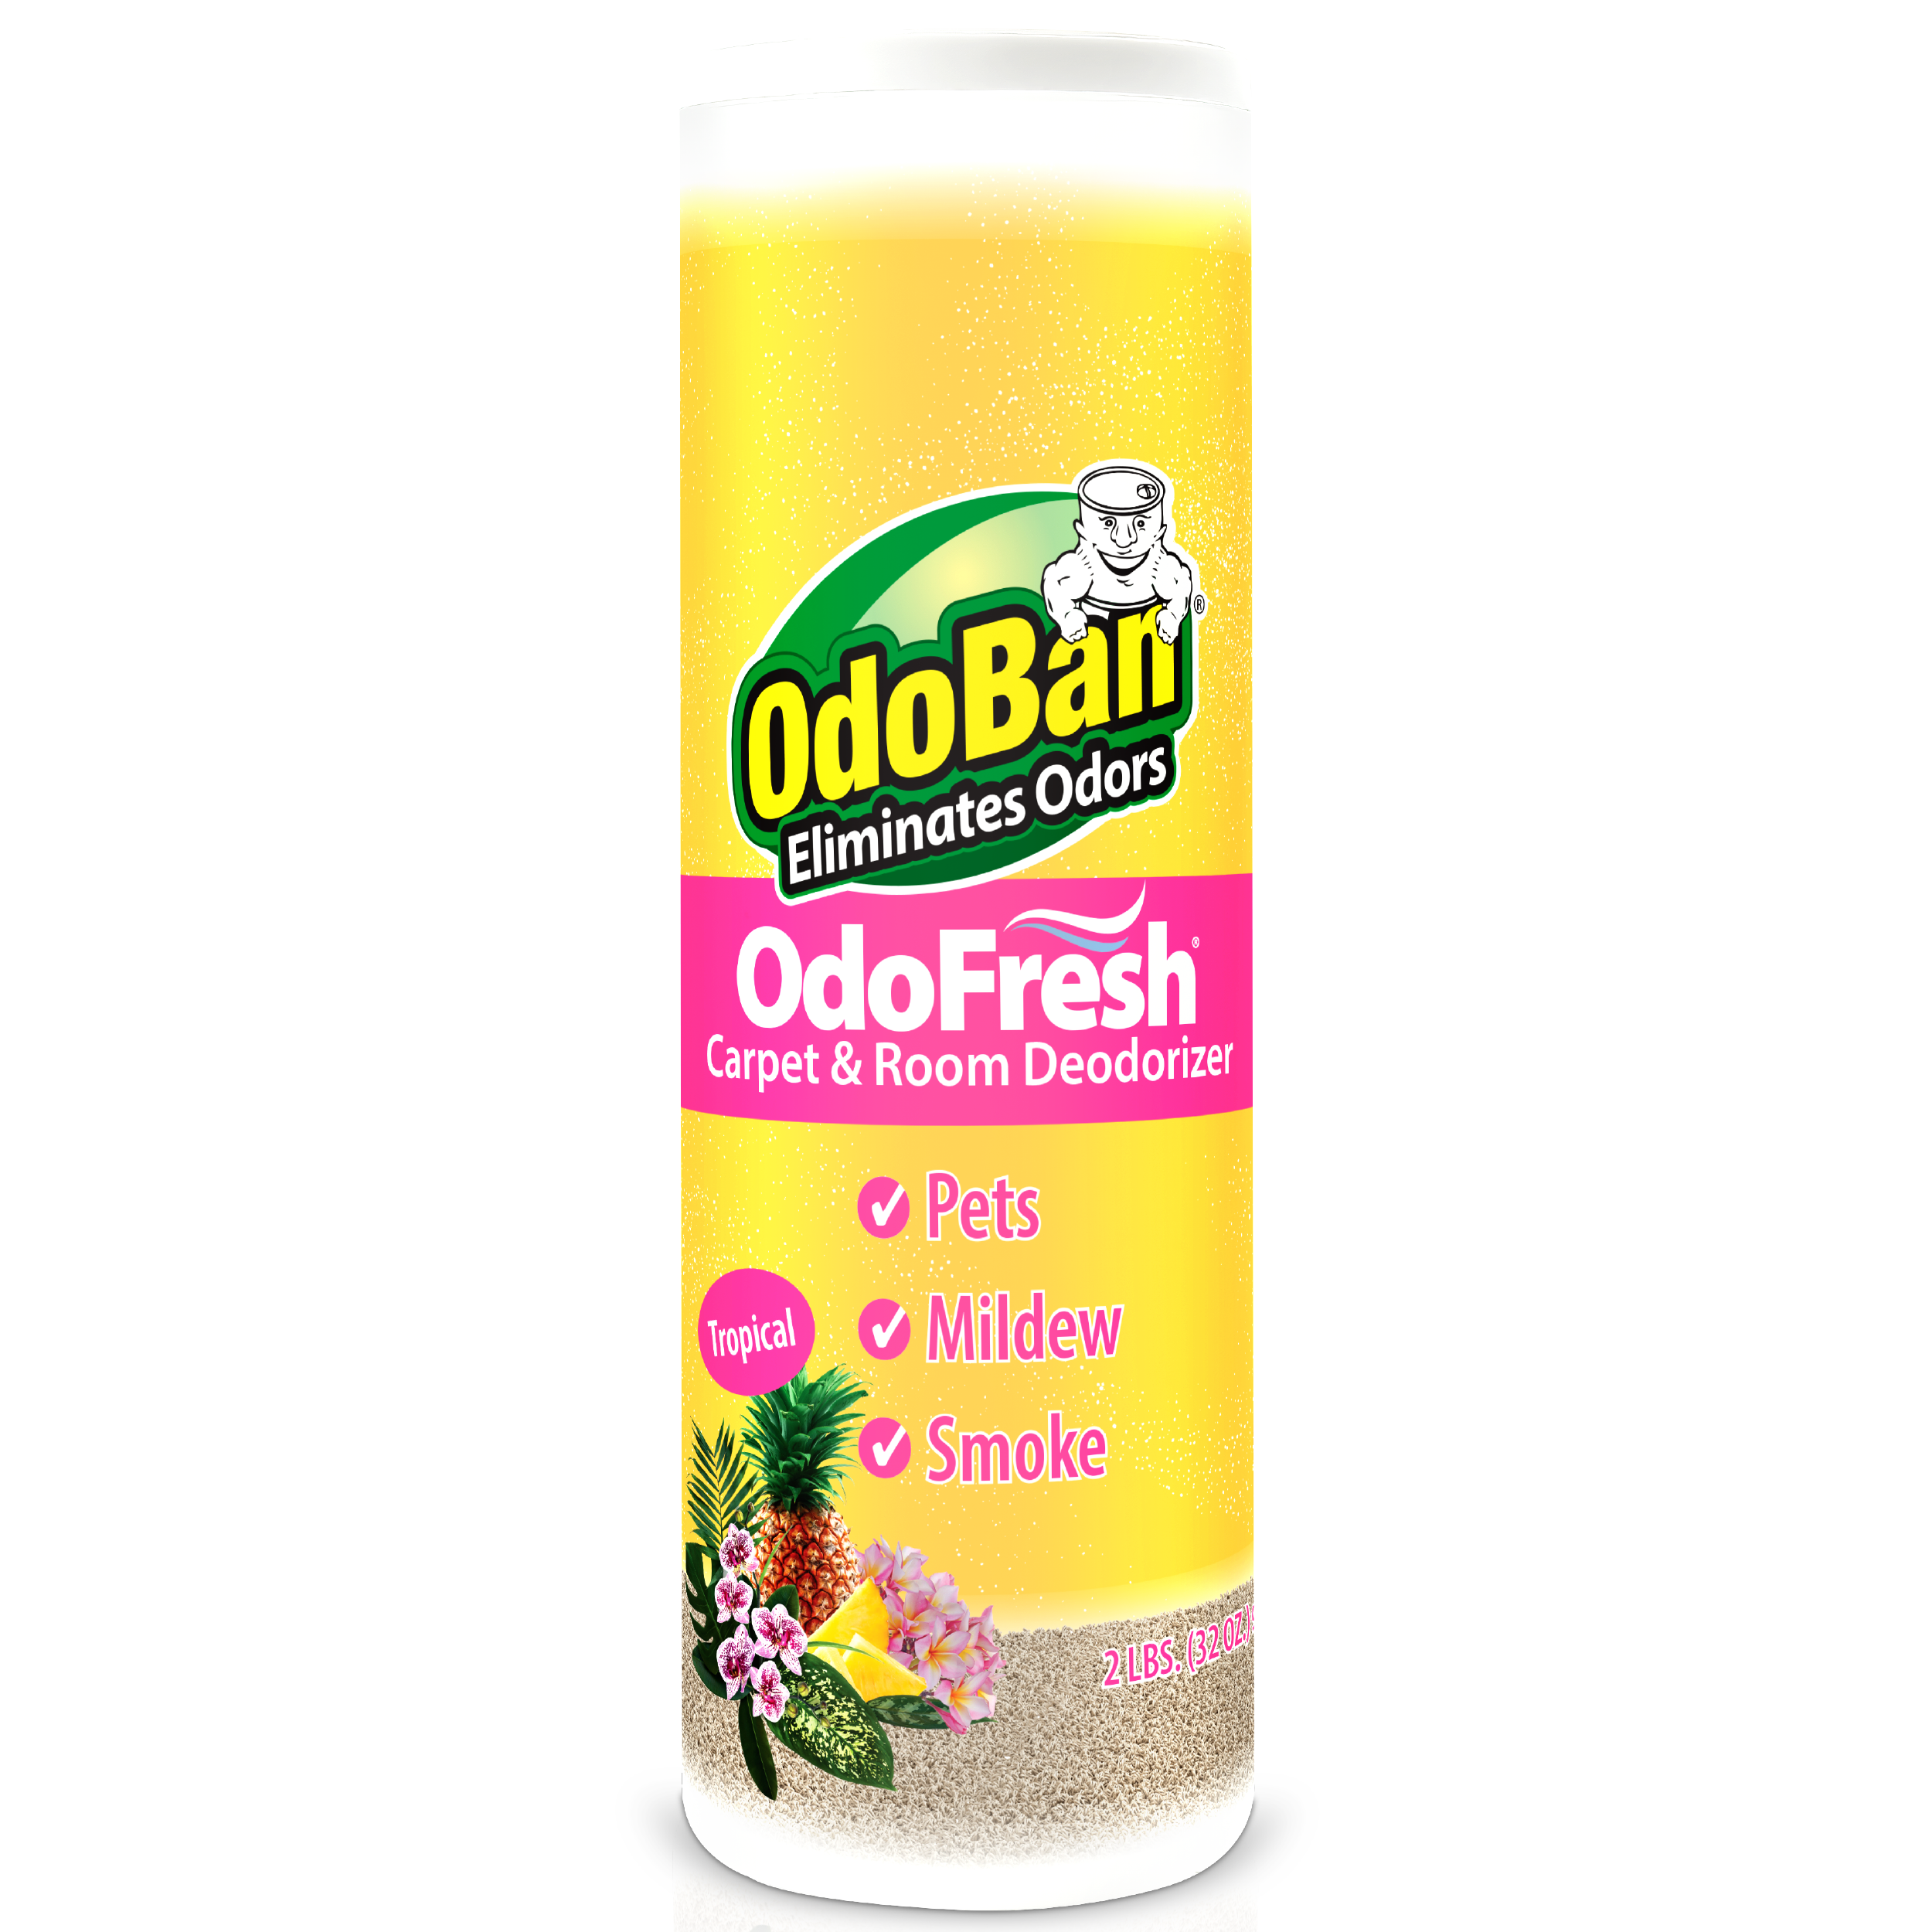 Odoban Odofresh Carpet Room Deodorizer Powder Odor Eliminator Air Freshener Disinfectant Sanitizer Fabric And Laundry All In One The Original By Clean Control